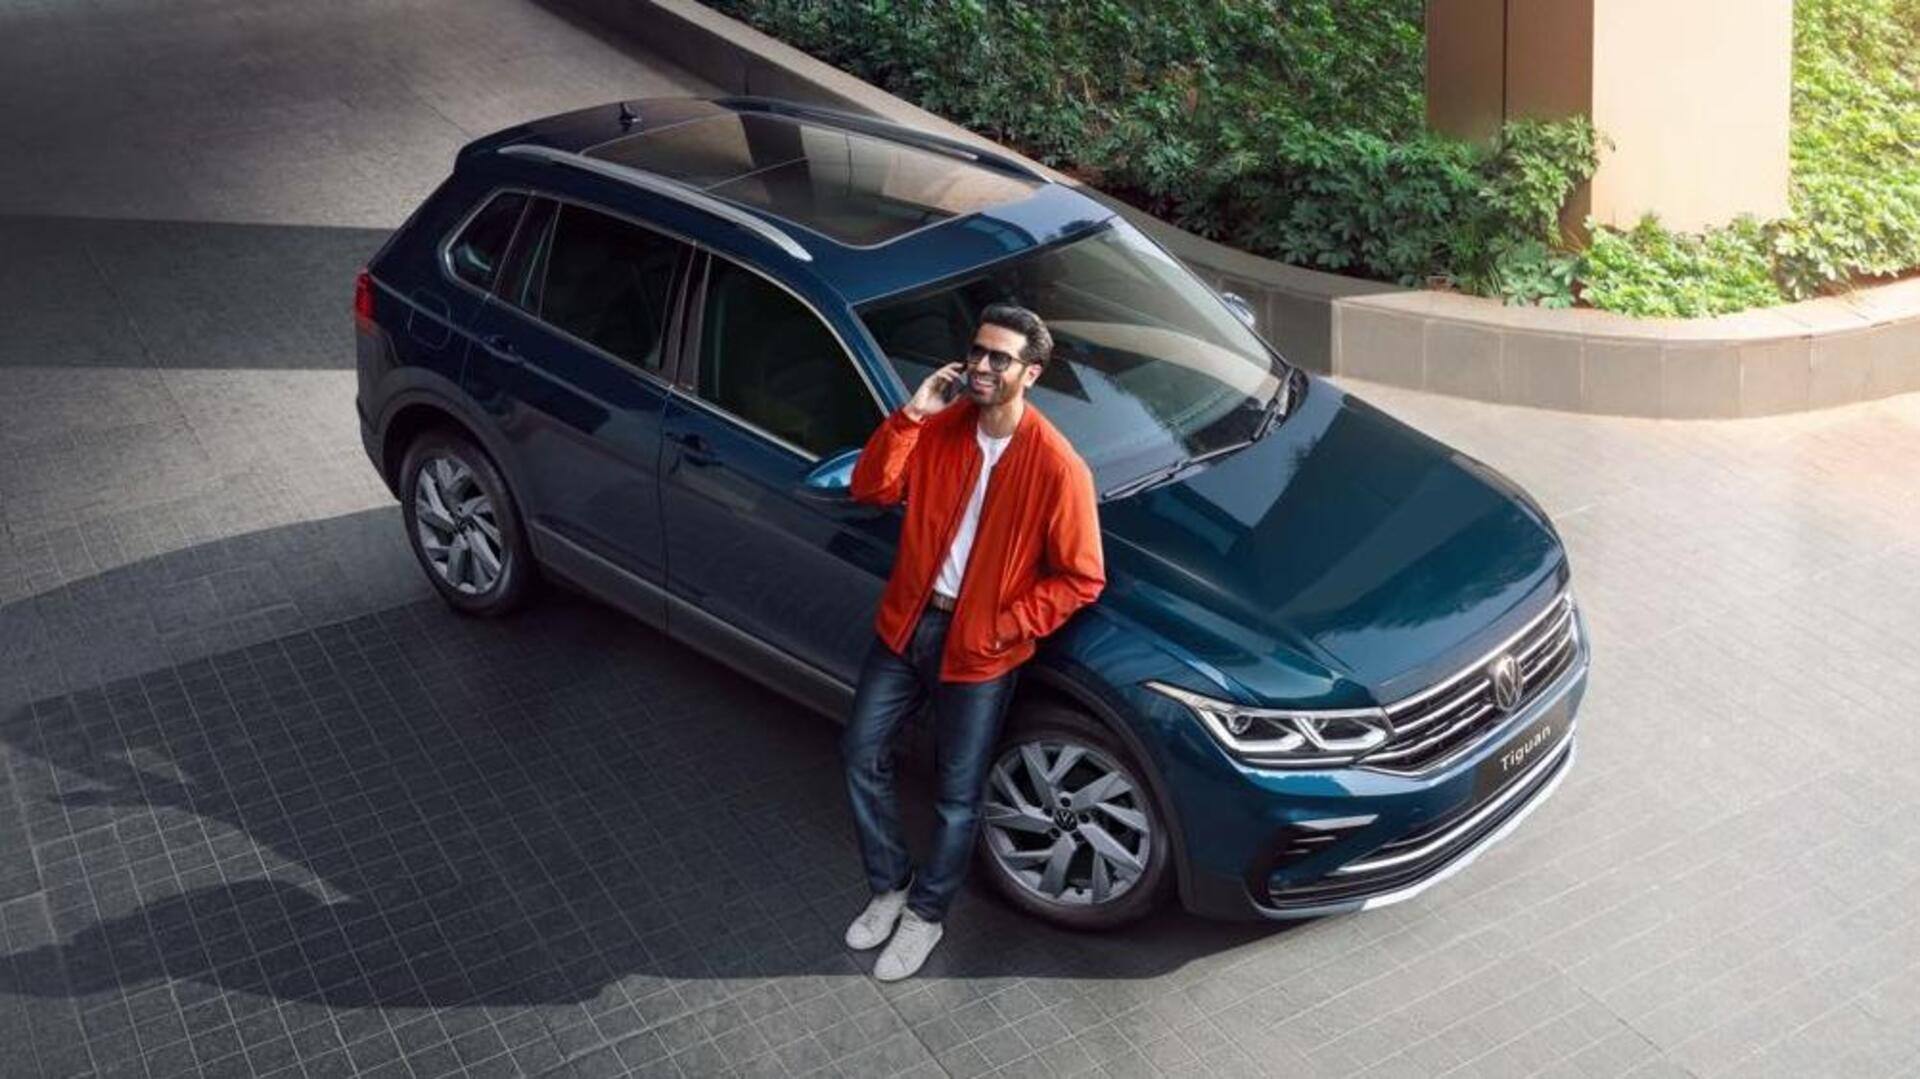 Volkswagen Tiguan receives third price-hike this year: Check new price